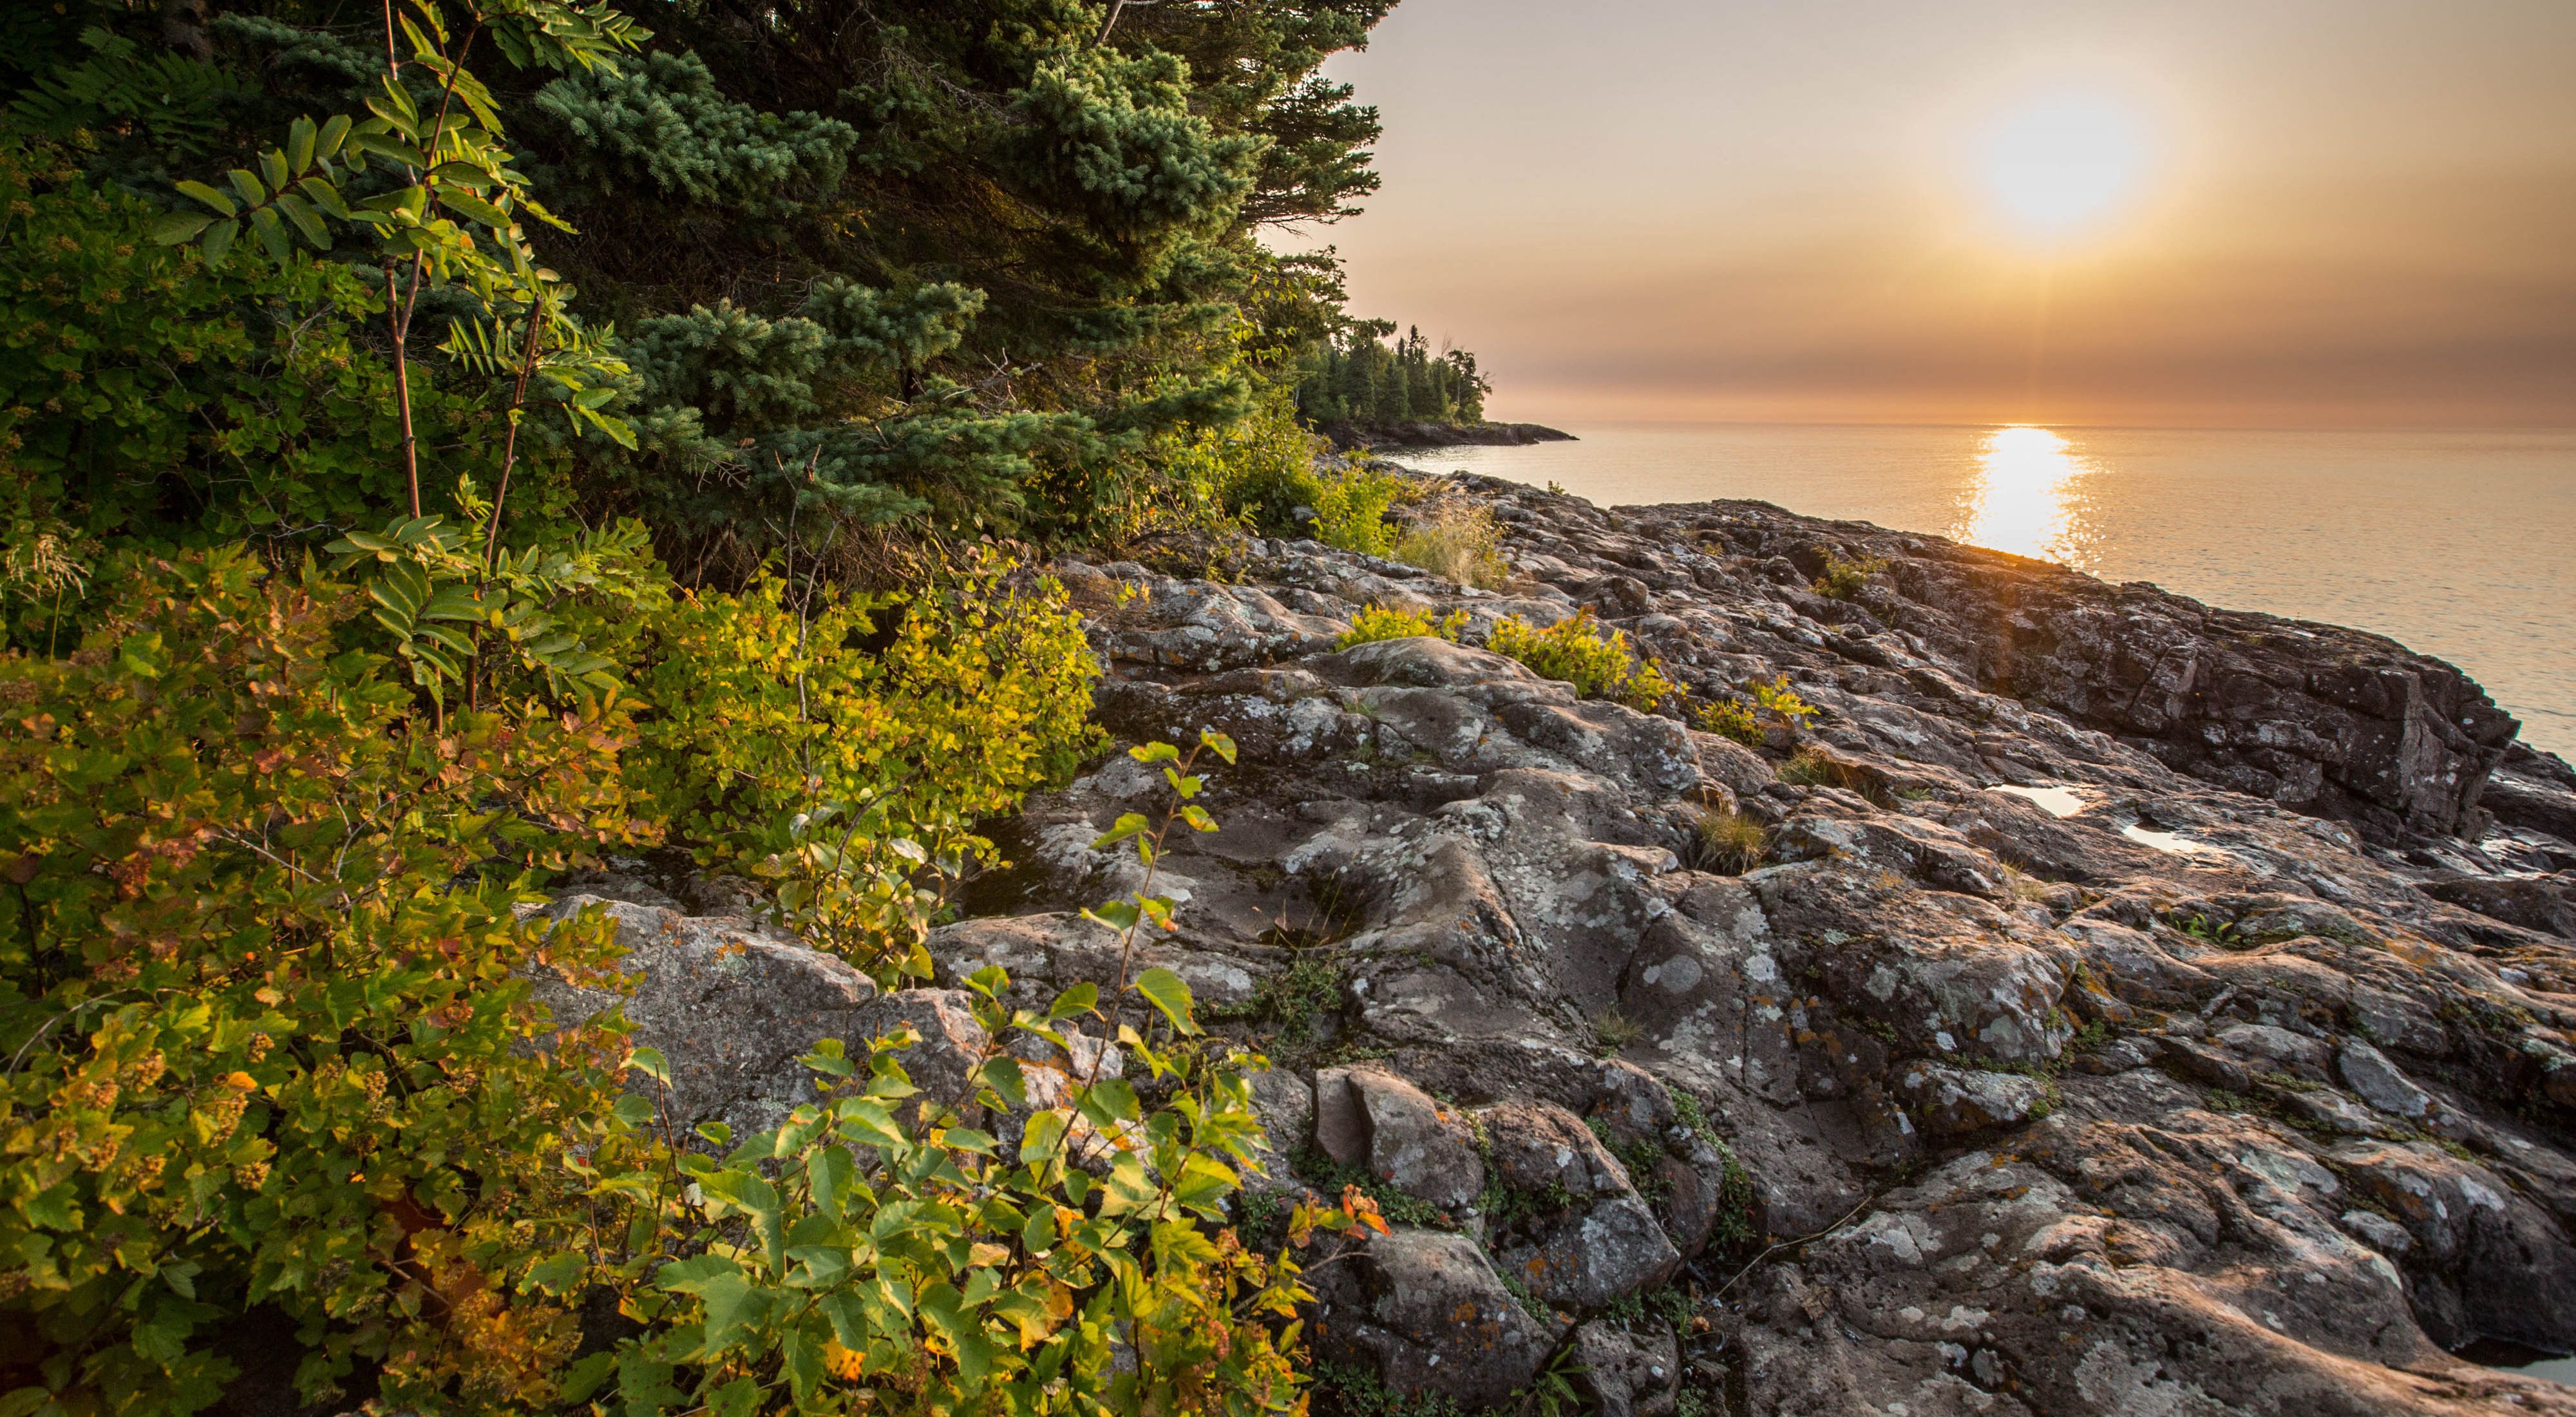 Sun setting over Lake Superior's North Shore in Minnesota along the Boundary Waters.